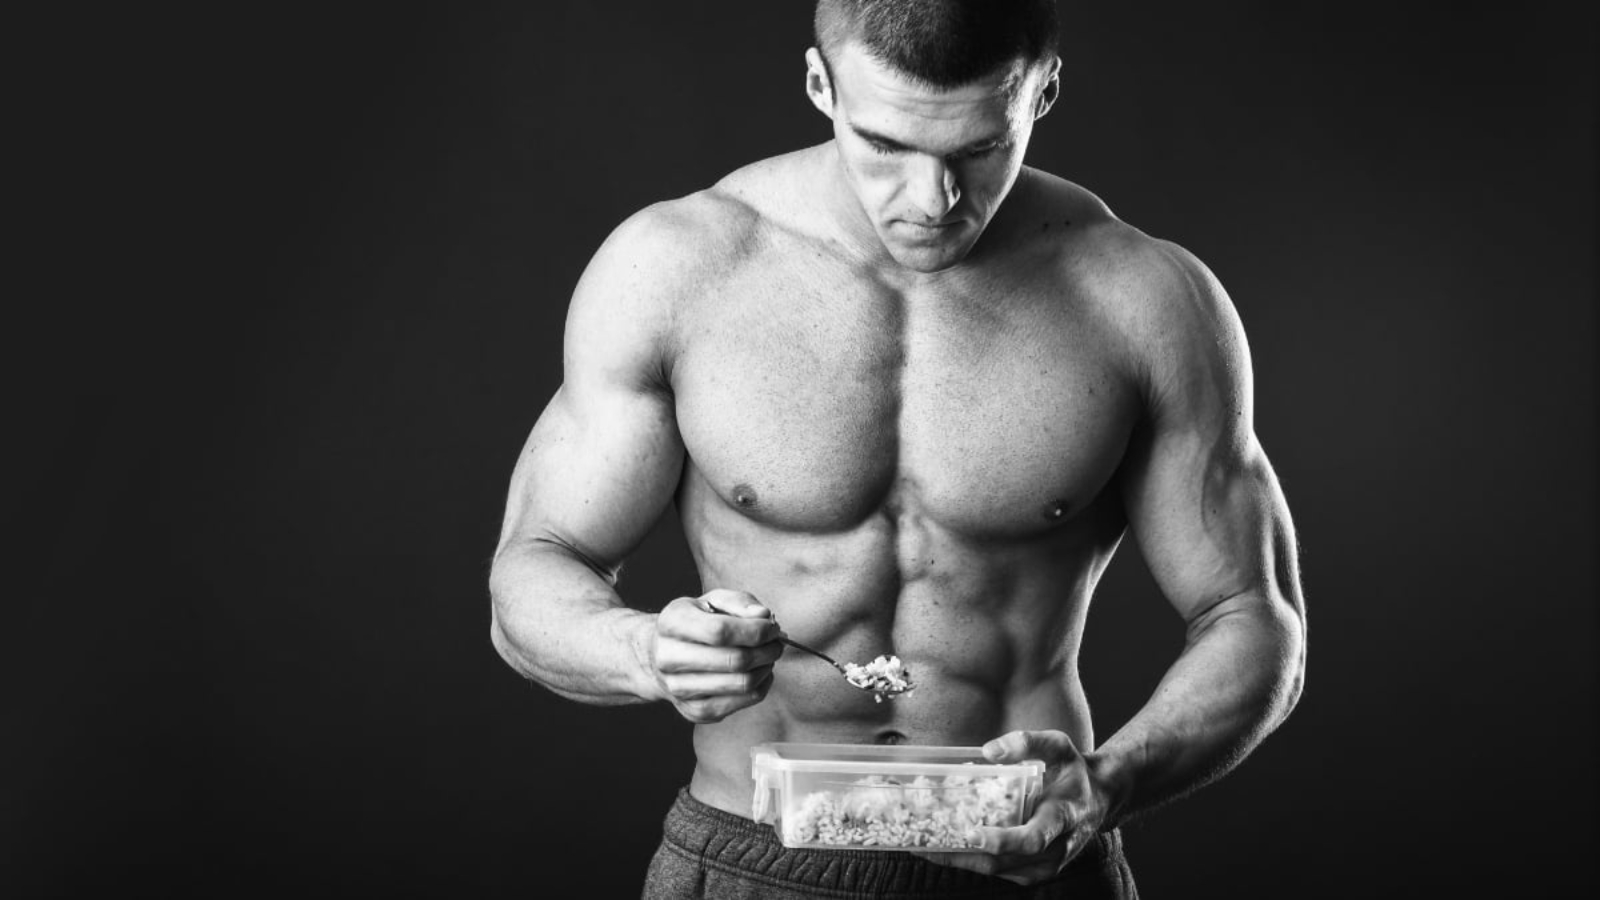 https://barbend.com/wp-content/uploads/2020/12/Barbend-Featured-Image-1600x900-A-muscular-person-eating-to-gain-muscle-mass.jpg